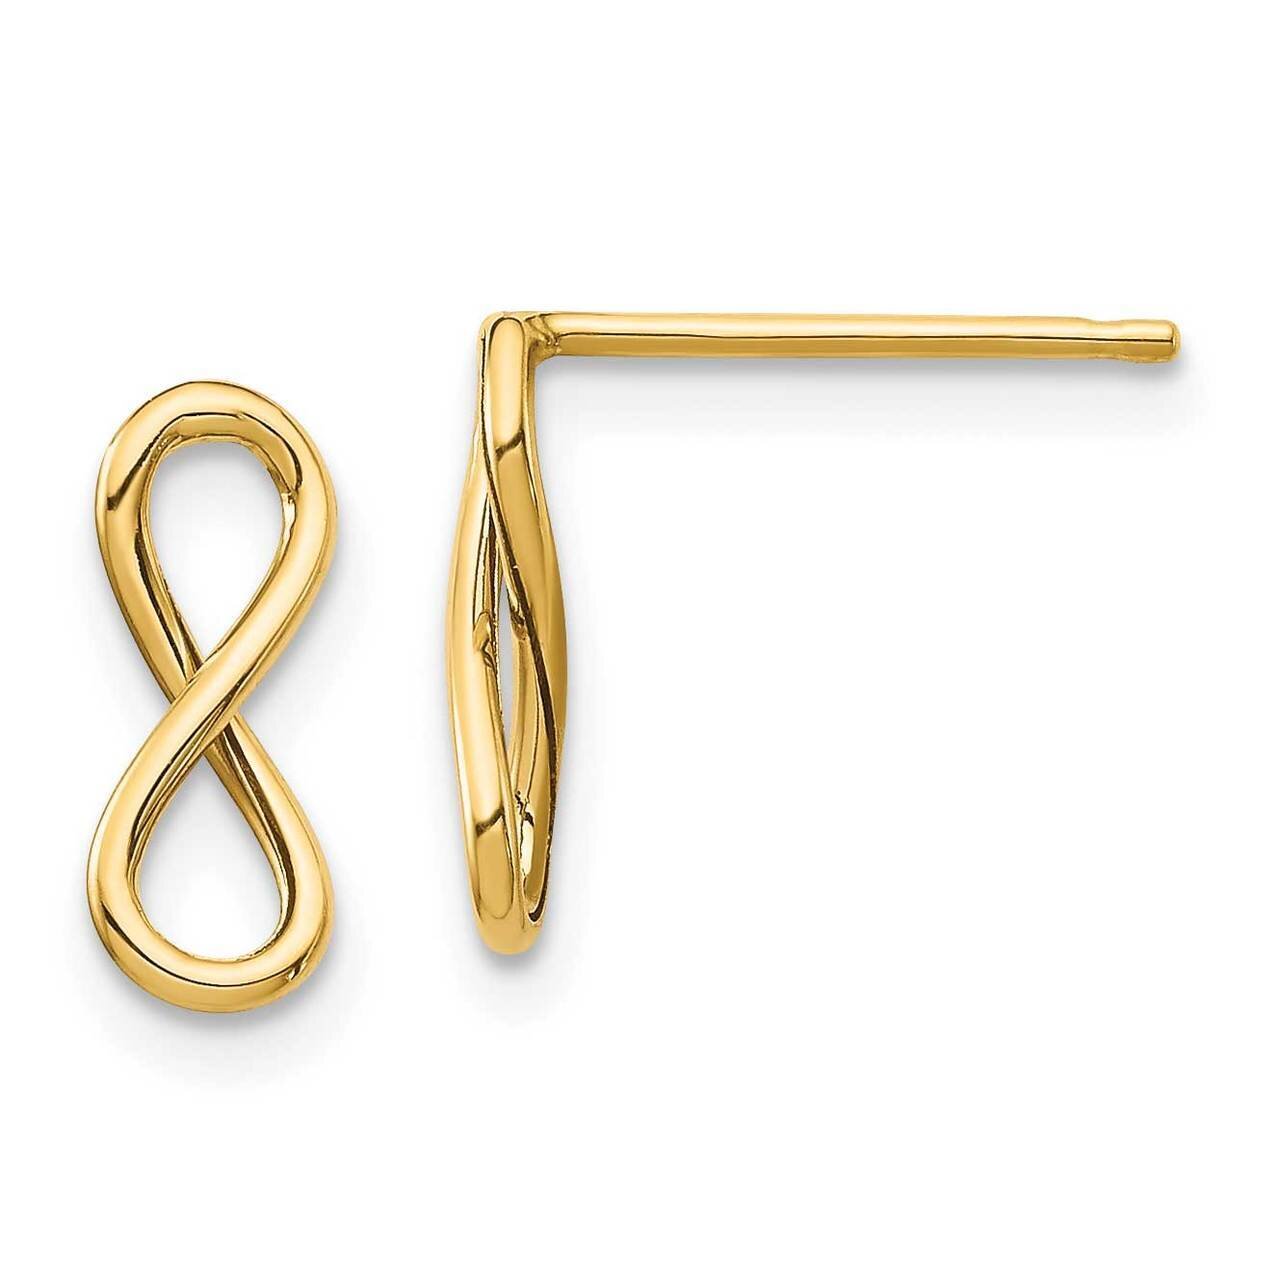 Infinity Post Earrings 14k Gold Polished TH994